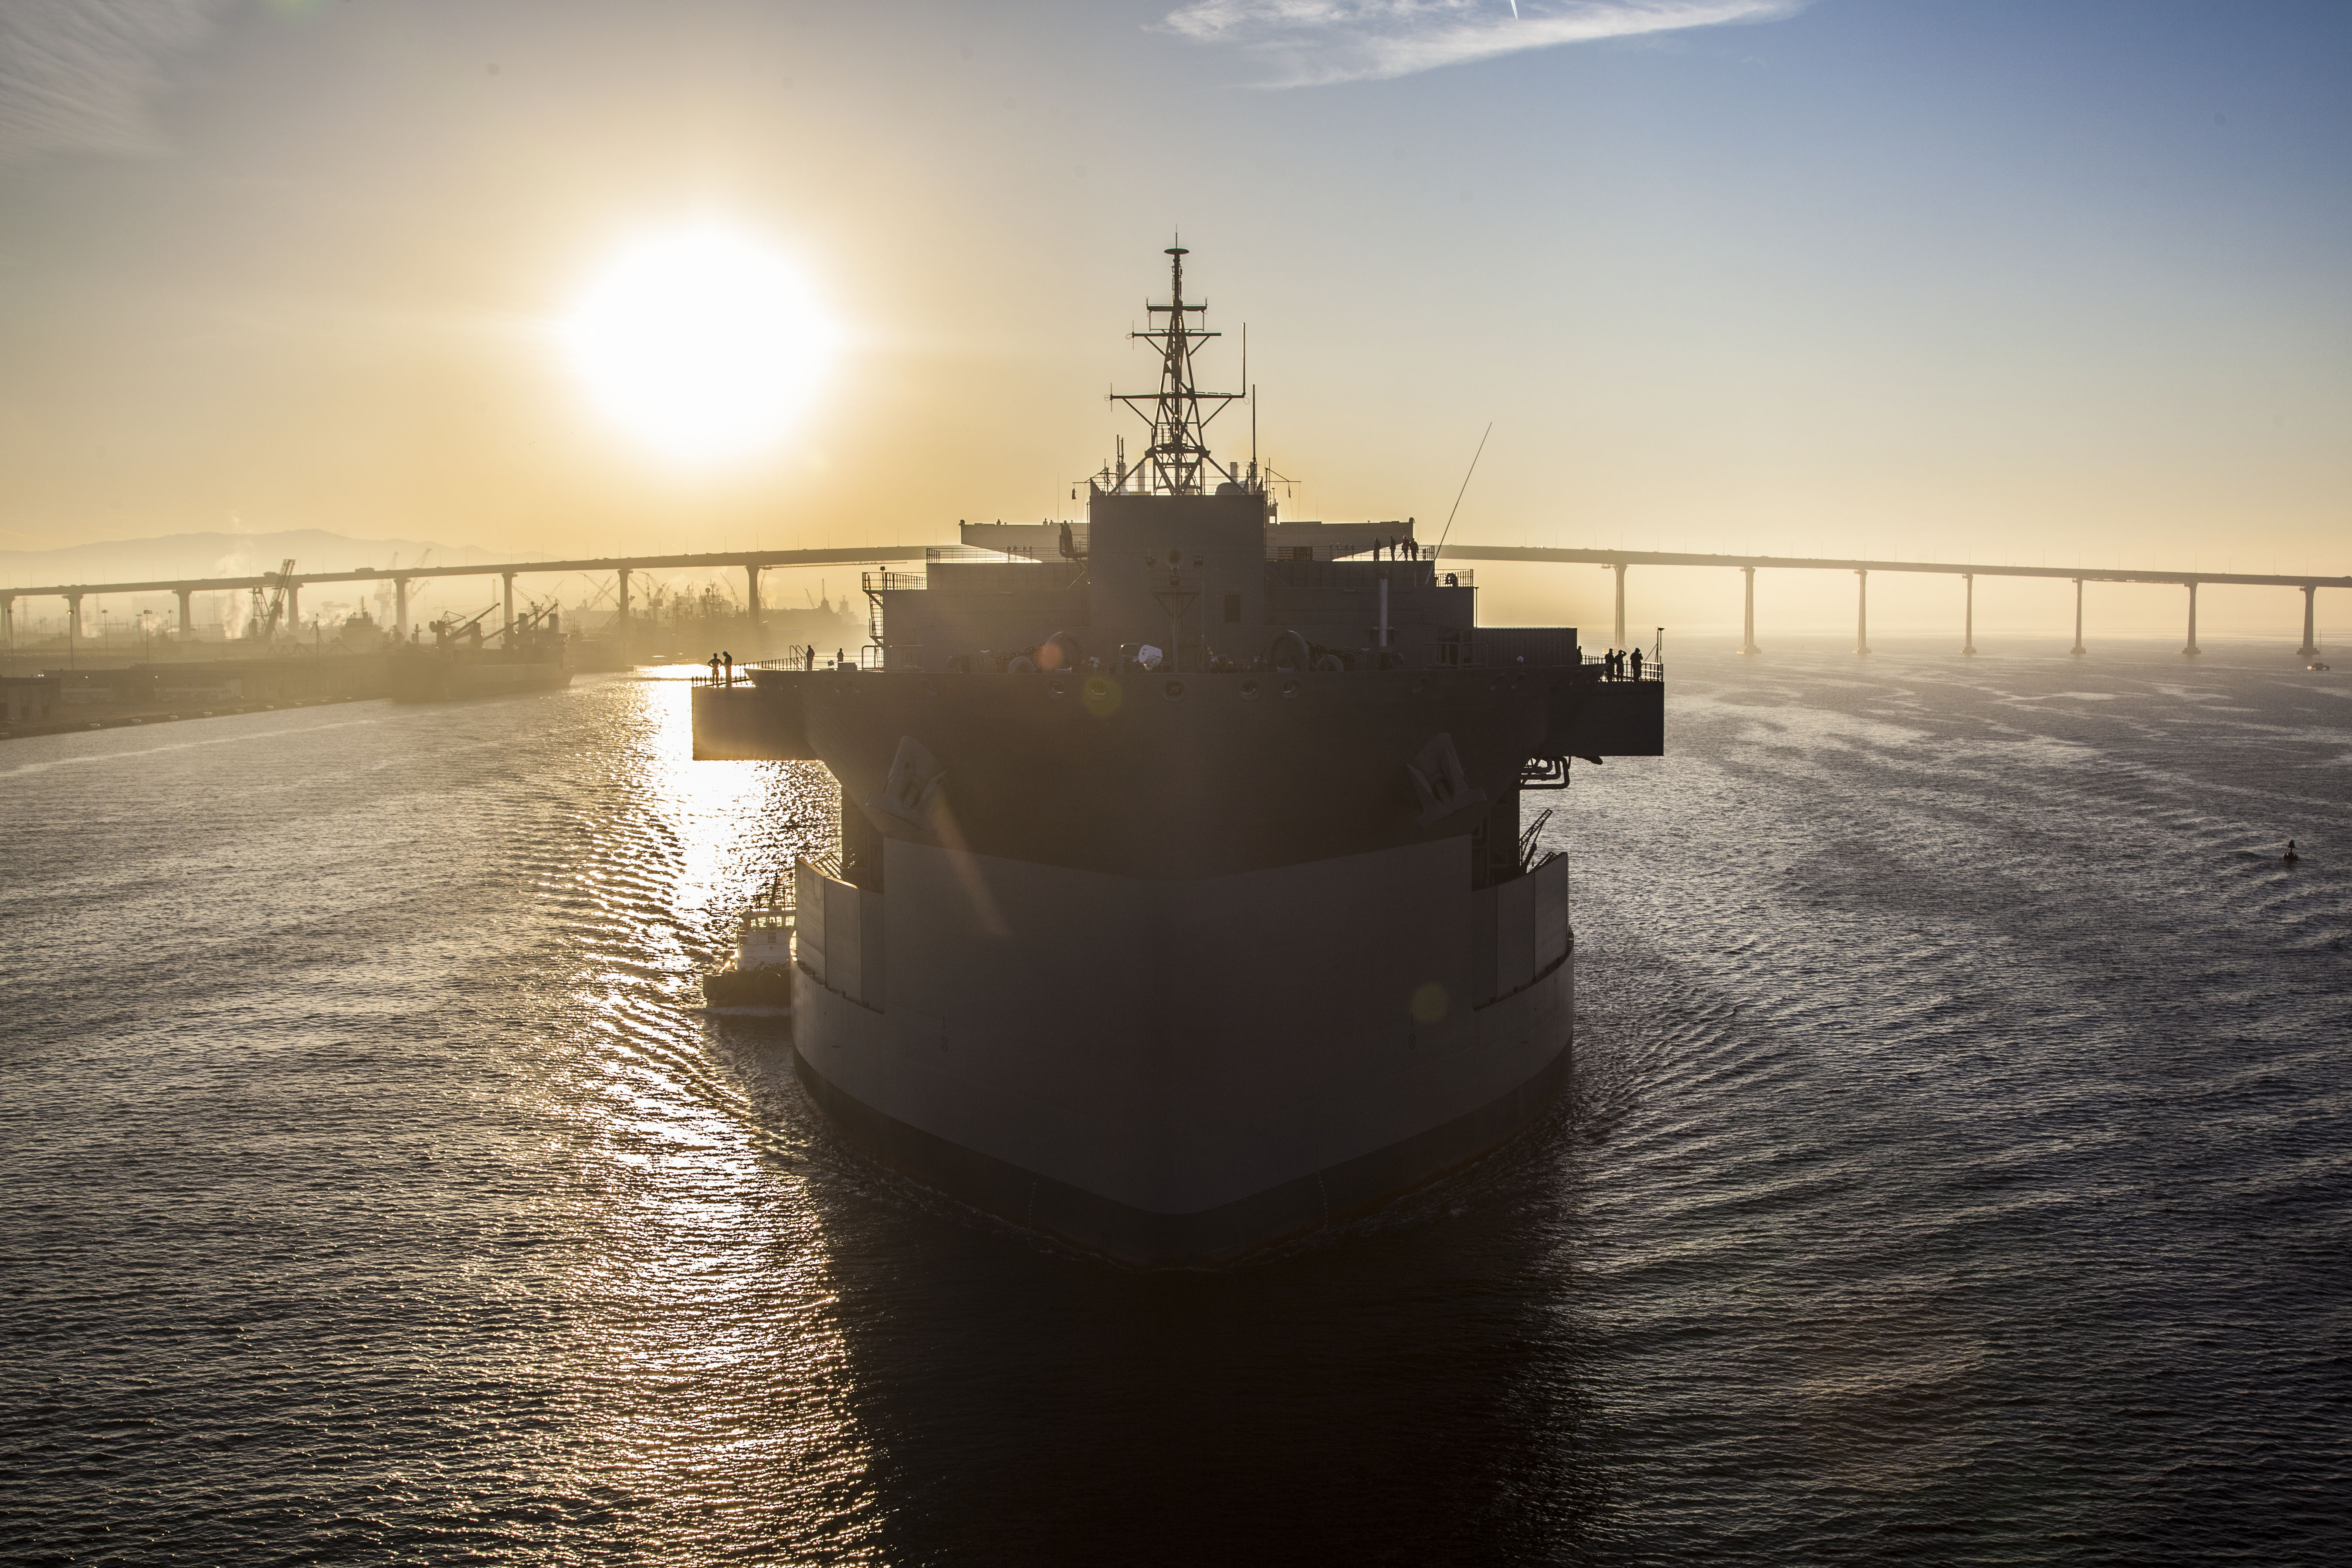 USNS Hershel "Woody" Williams, designed and built by General Dynamics NASSCO, completes sea trials and is delivered to the U.S. Navy